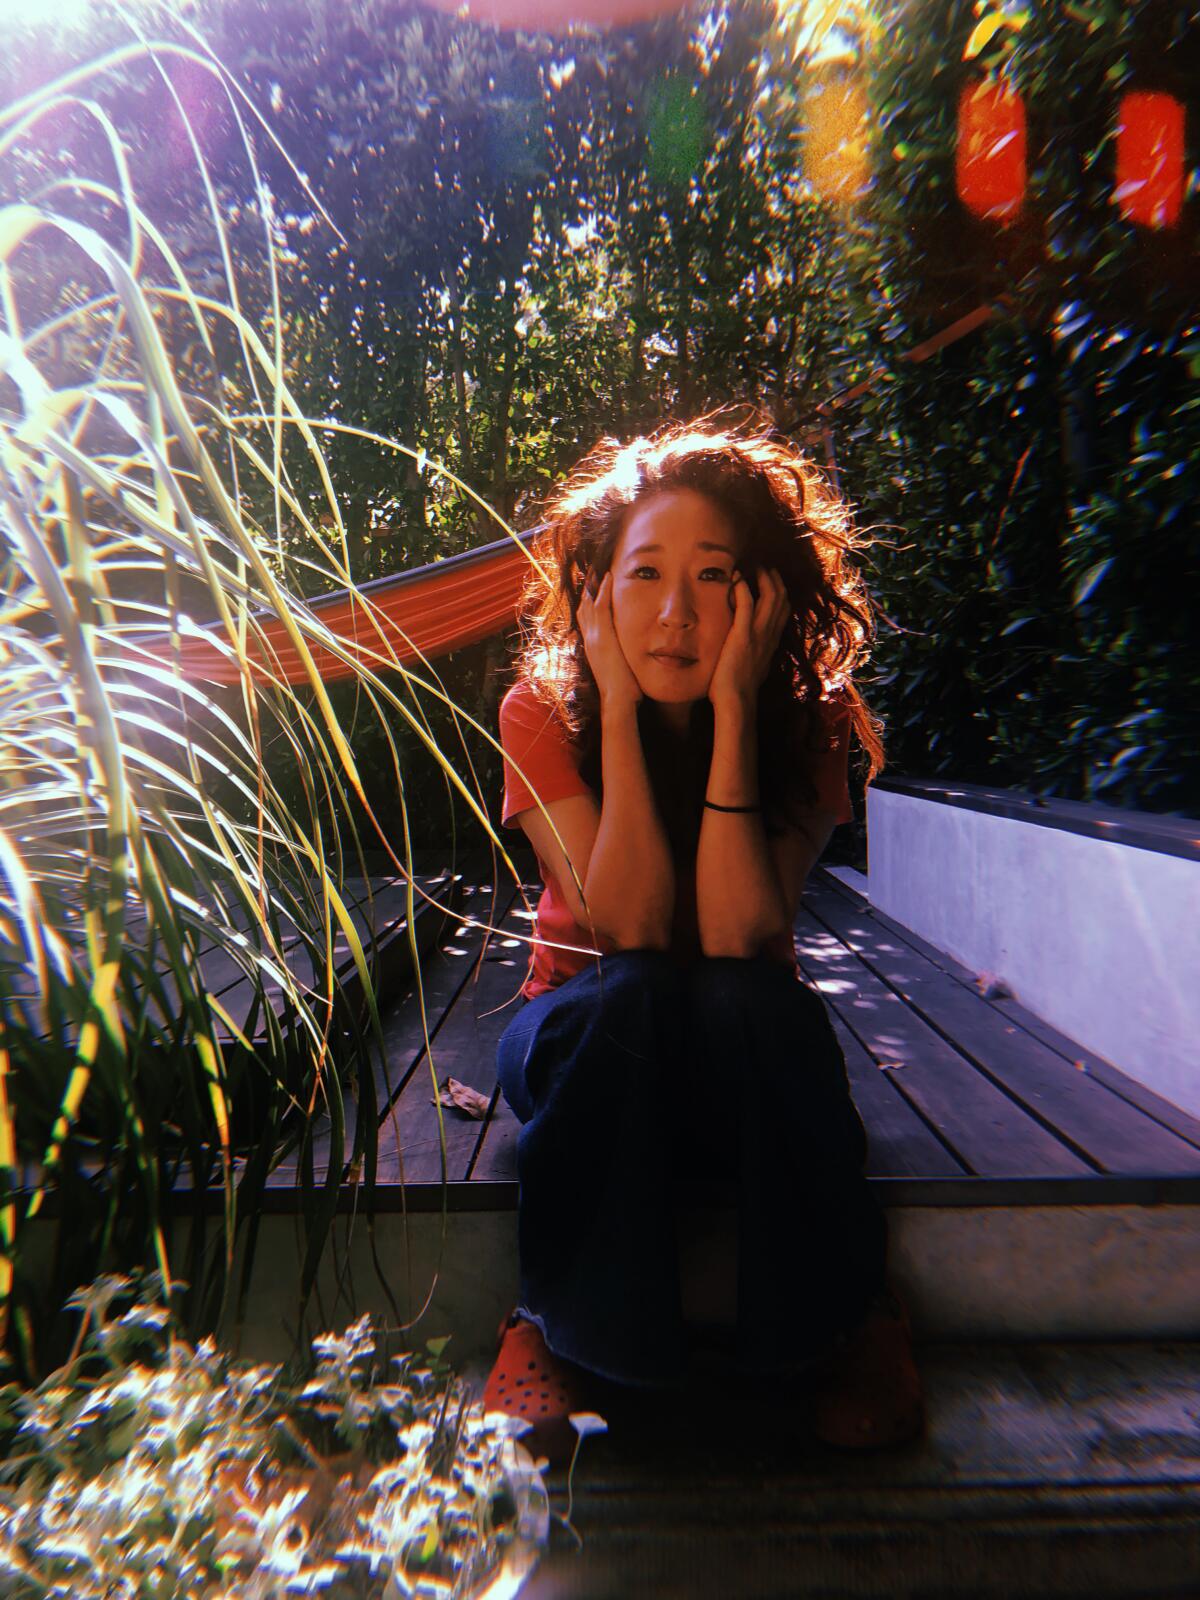 Actress Sandra Oh used the Huji app for her portrait while isolating at home.